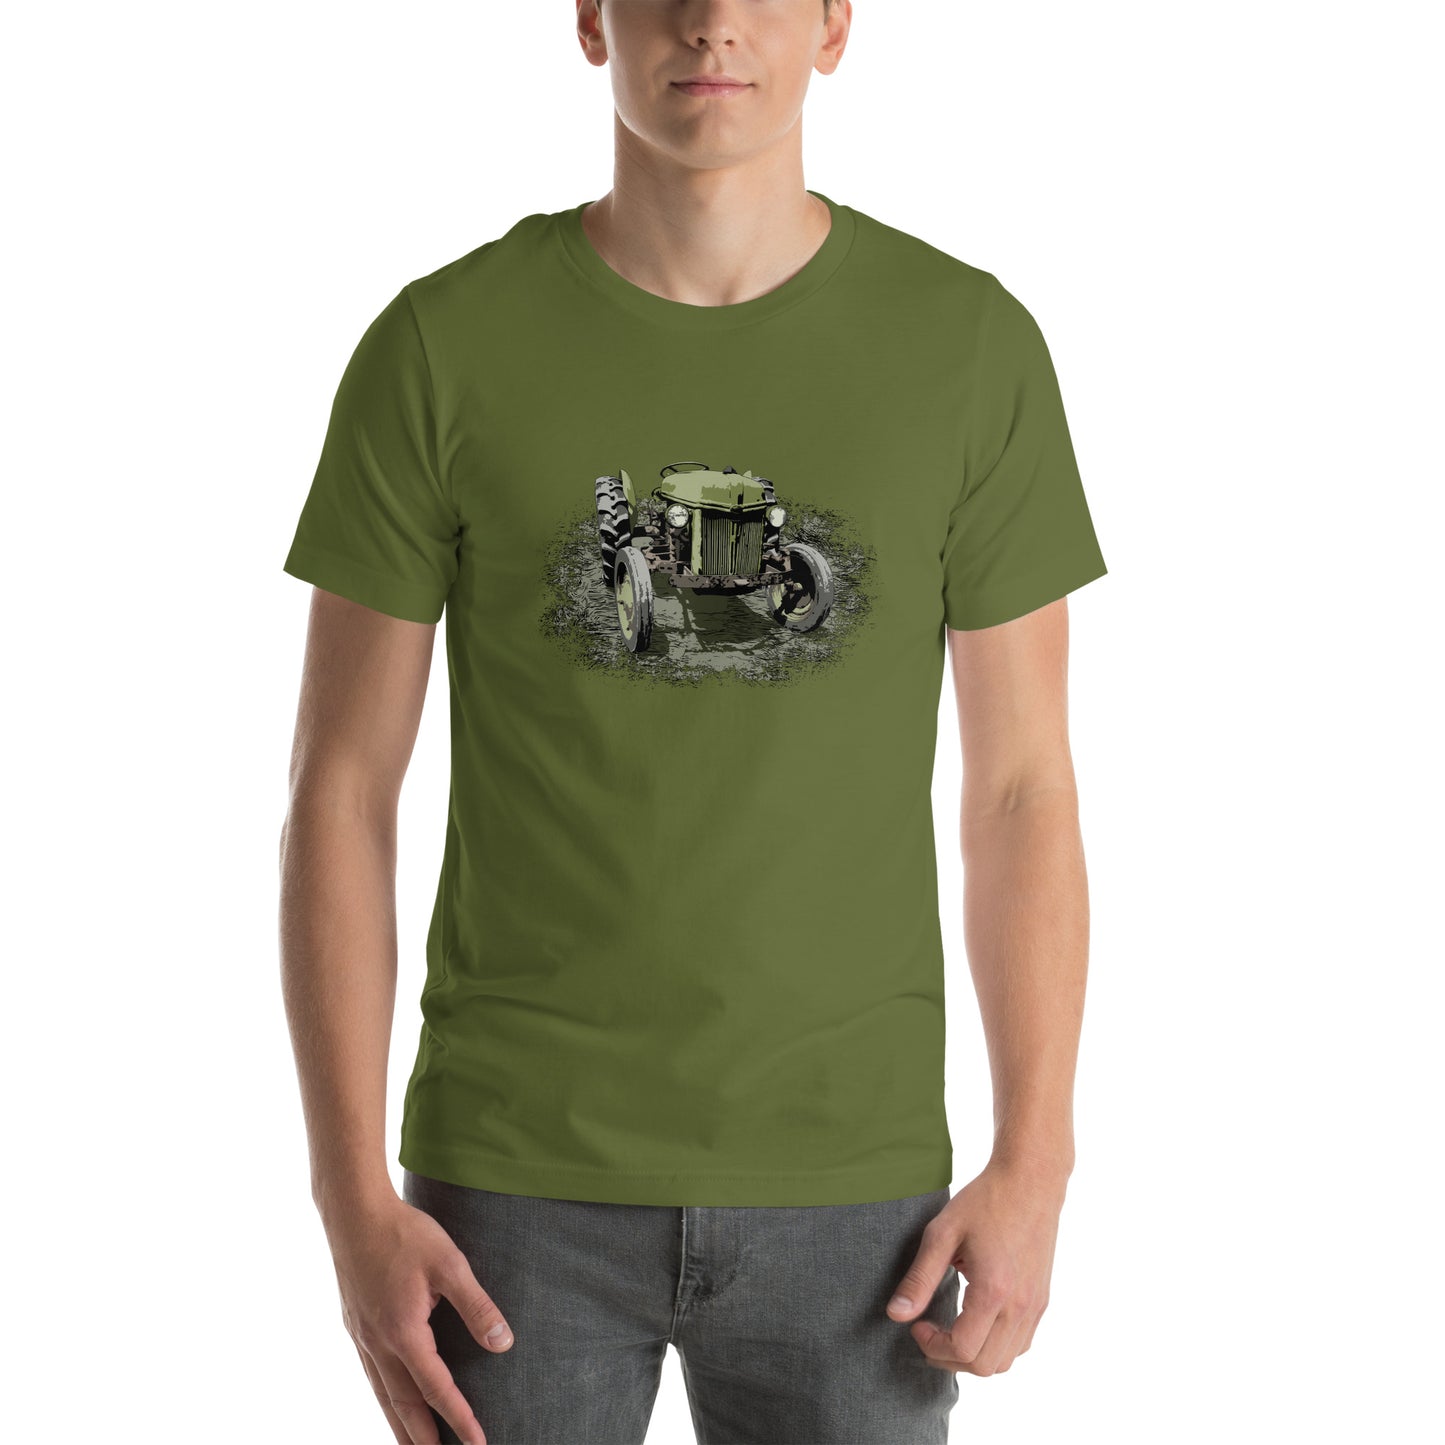 Rustic Farming - Antique Green Farm Tractor Unisex t-shirt -  Vintage Ford Tractor